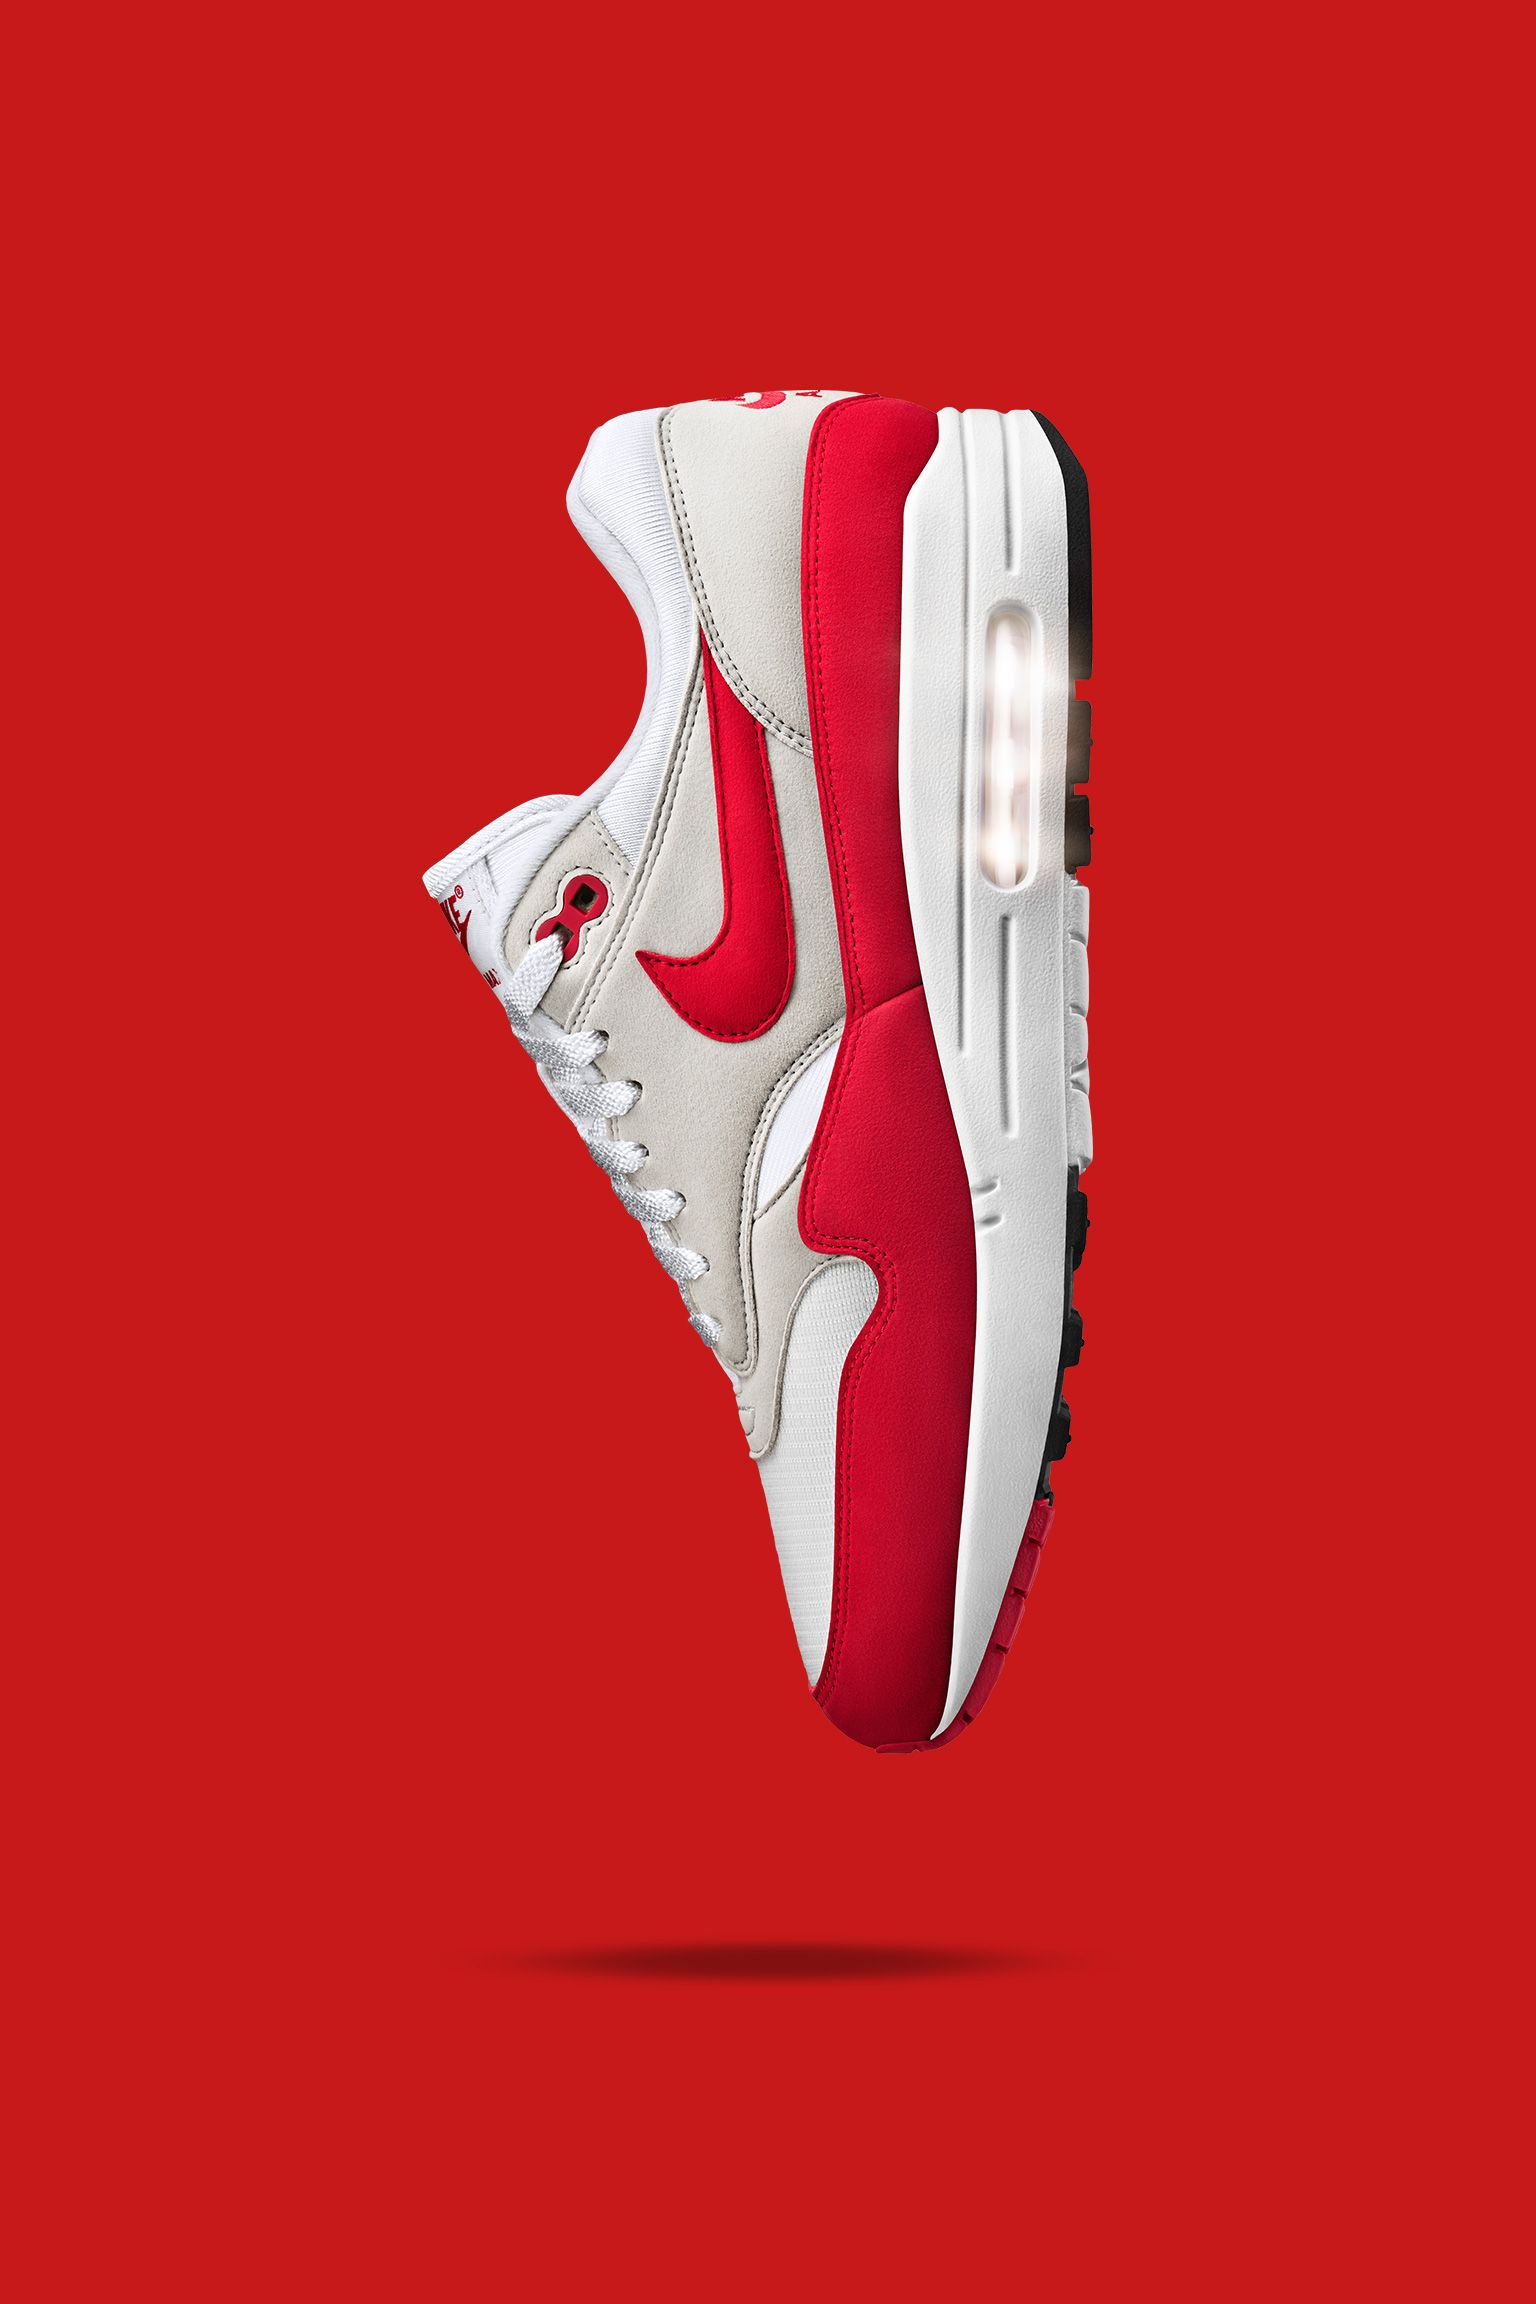 palo sol Lluvioso Nike Air Max Wallpapers on WallpaperDog